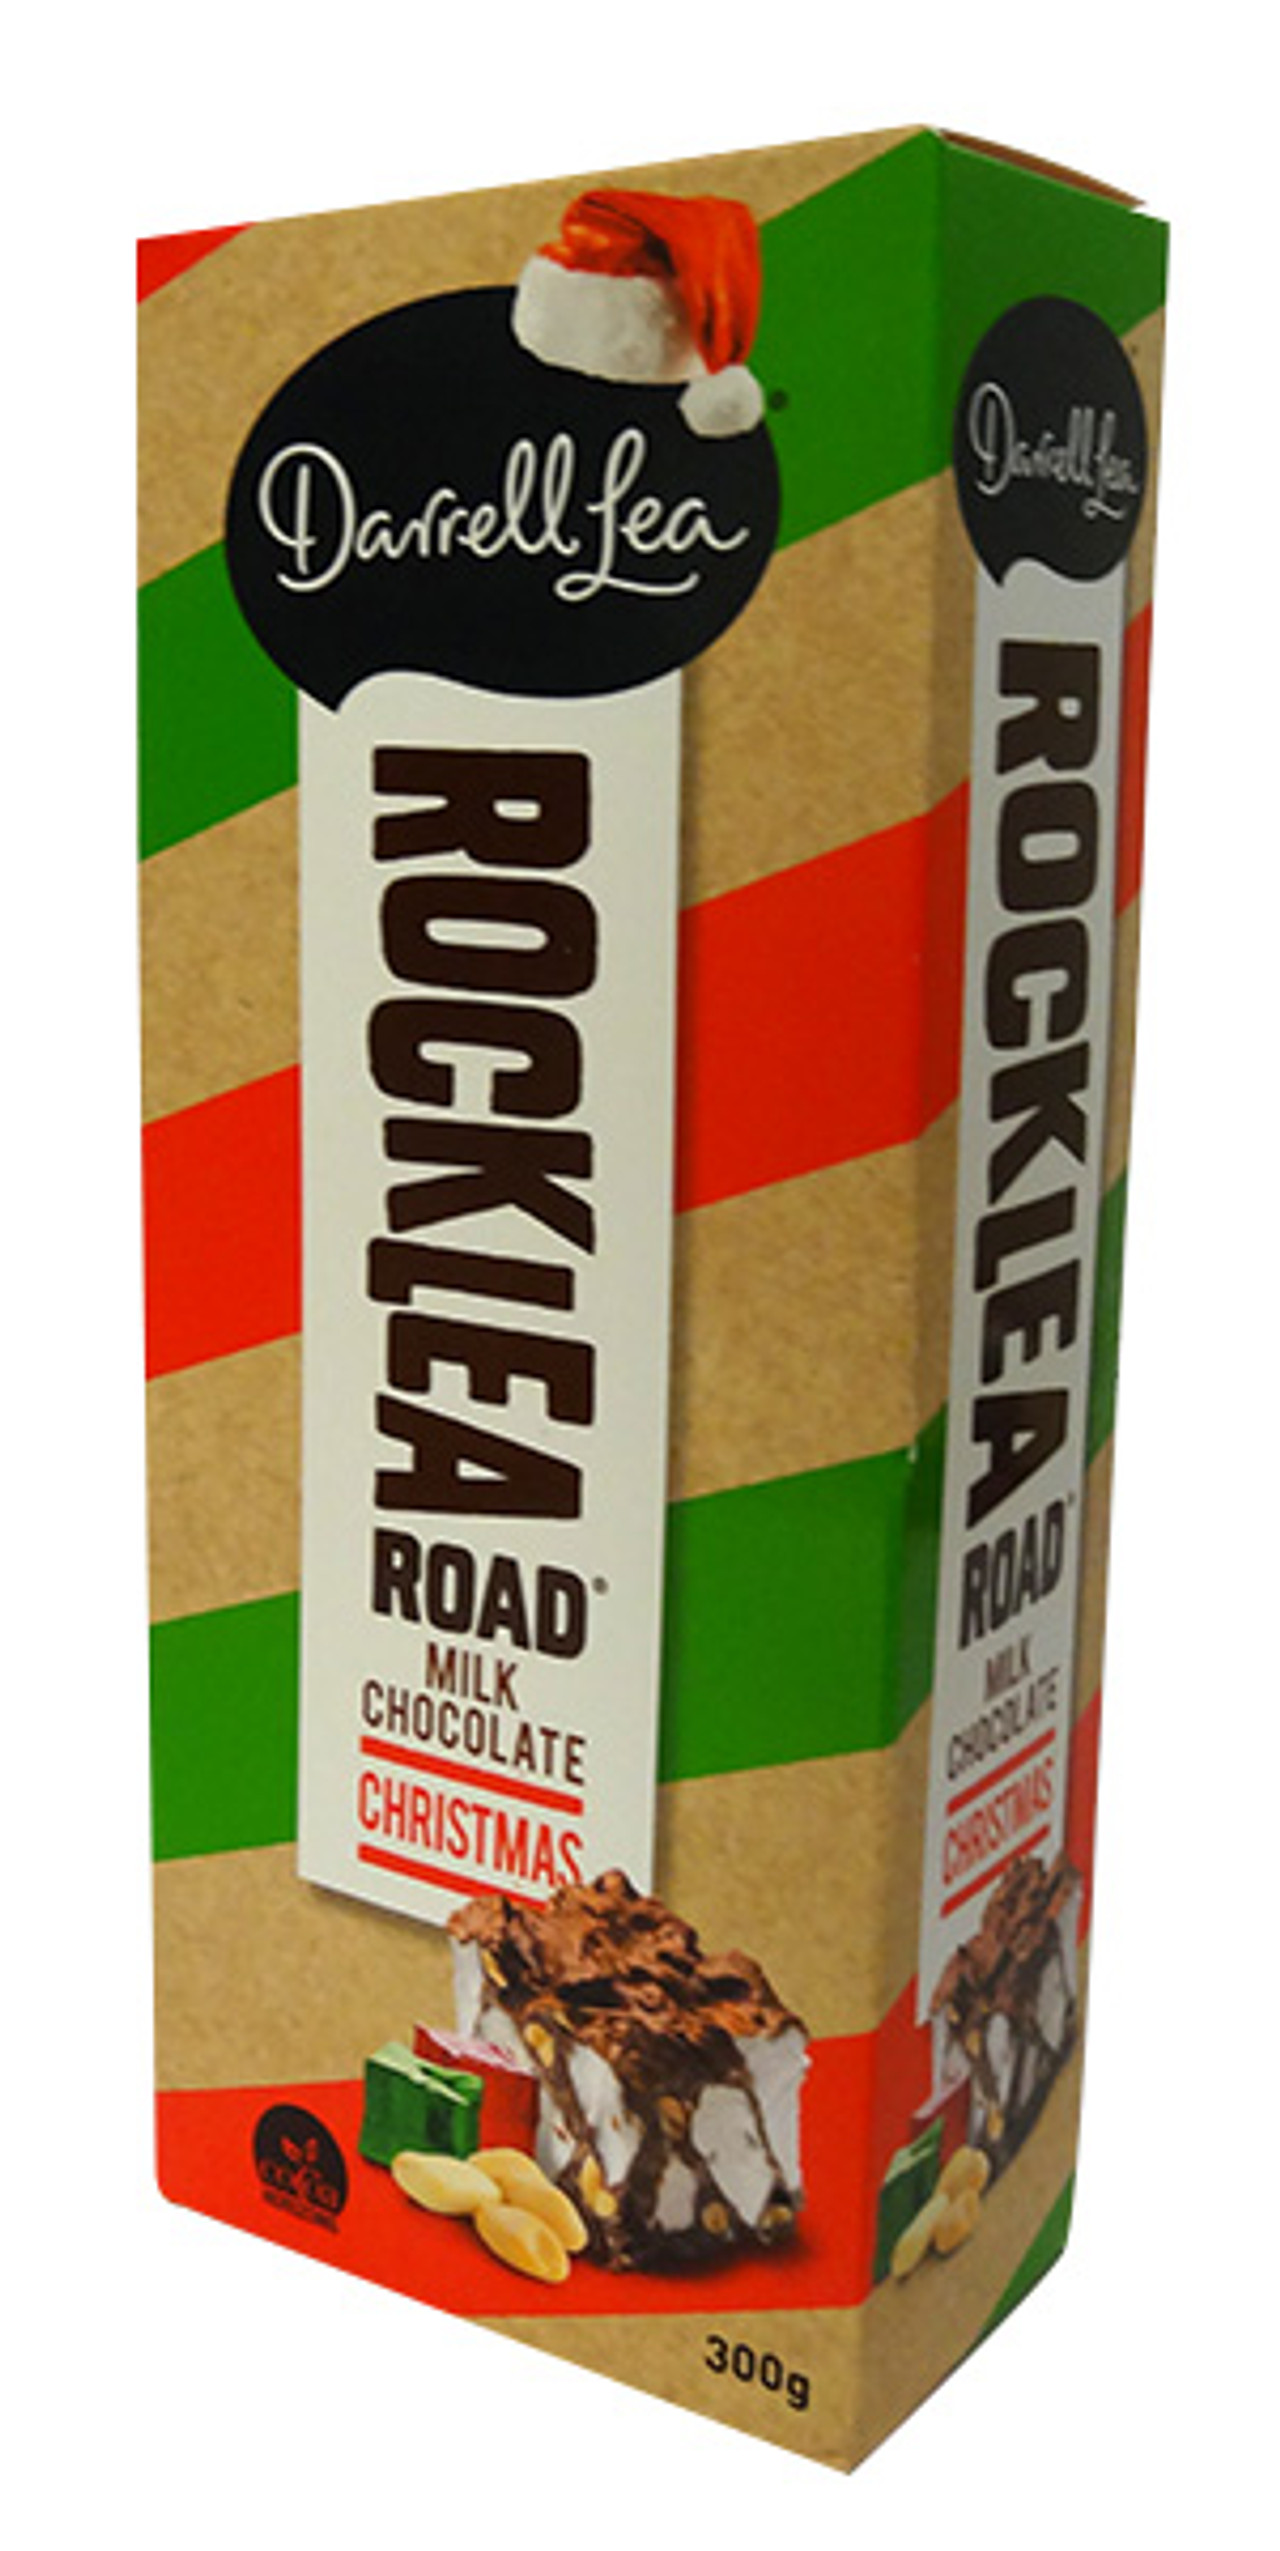 Darrell Lea Rocklea Road Christmas Recipe, now available to Buy